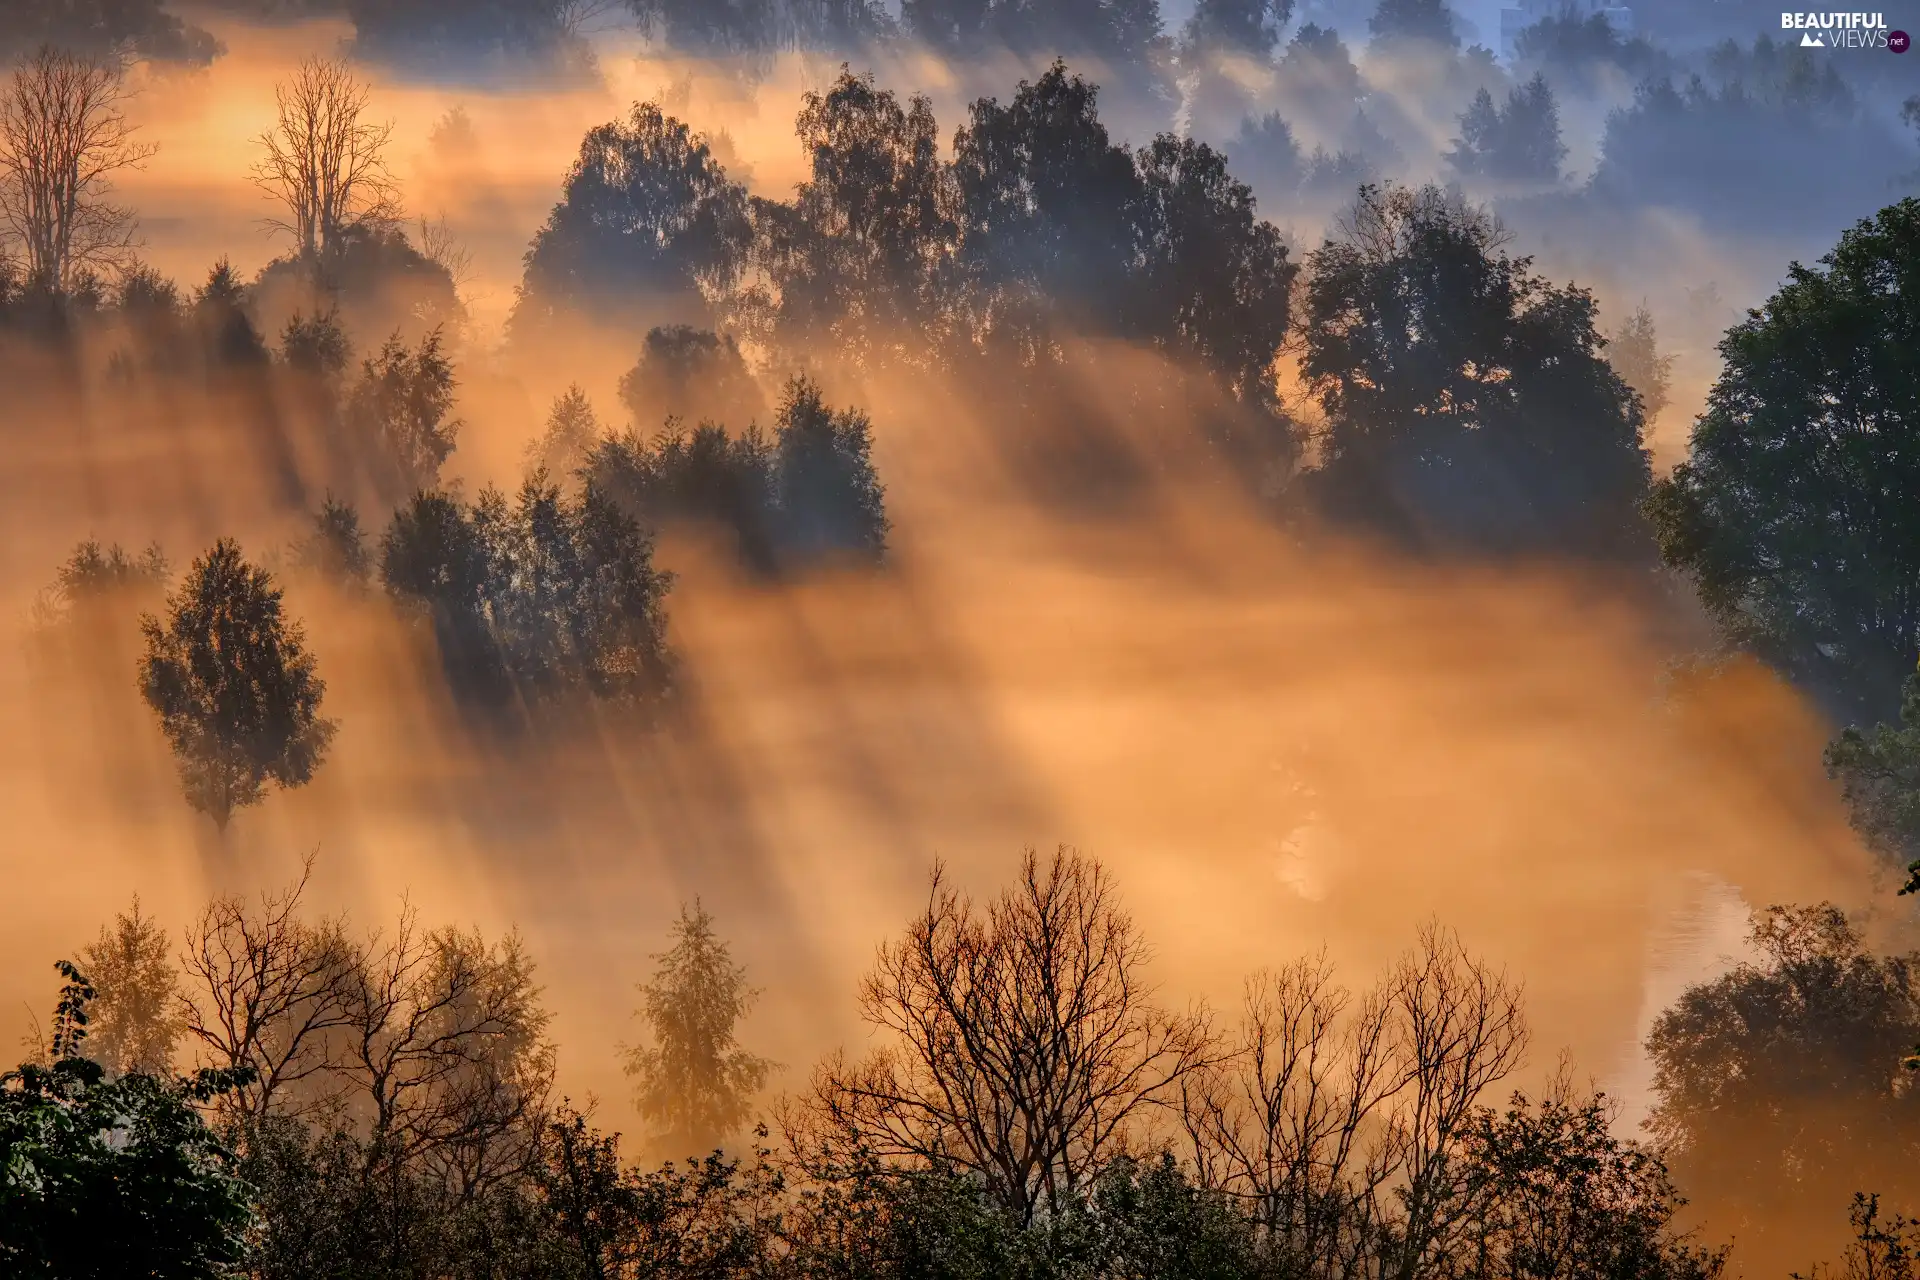 Fog, light breaking through sky, viewes, forest, trees